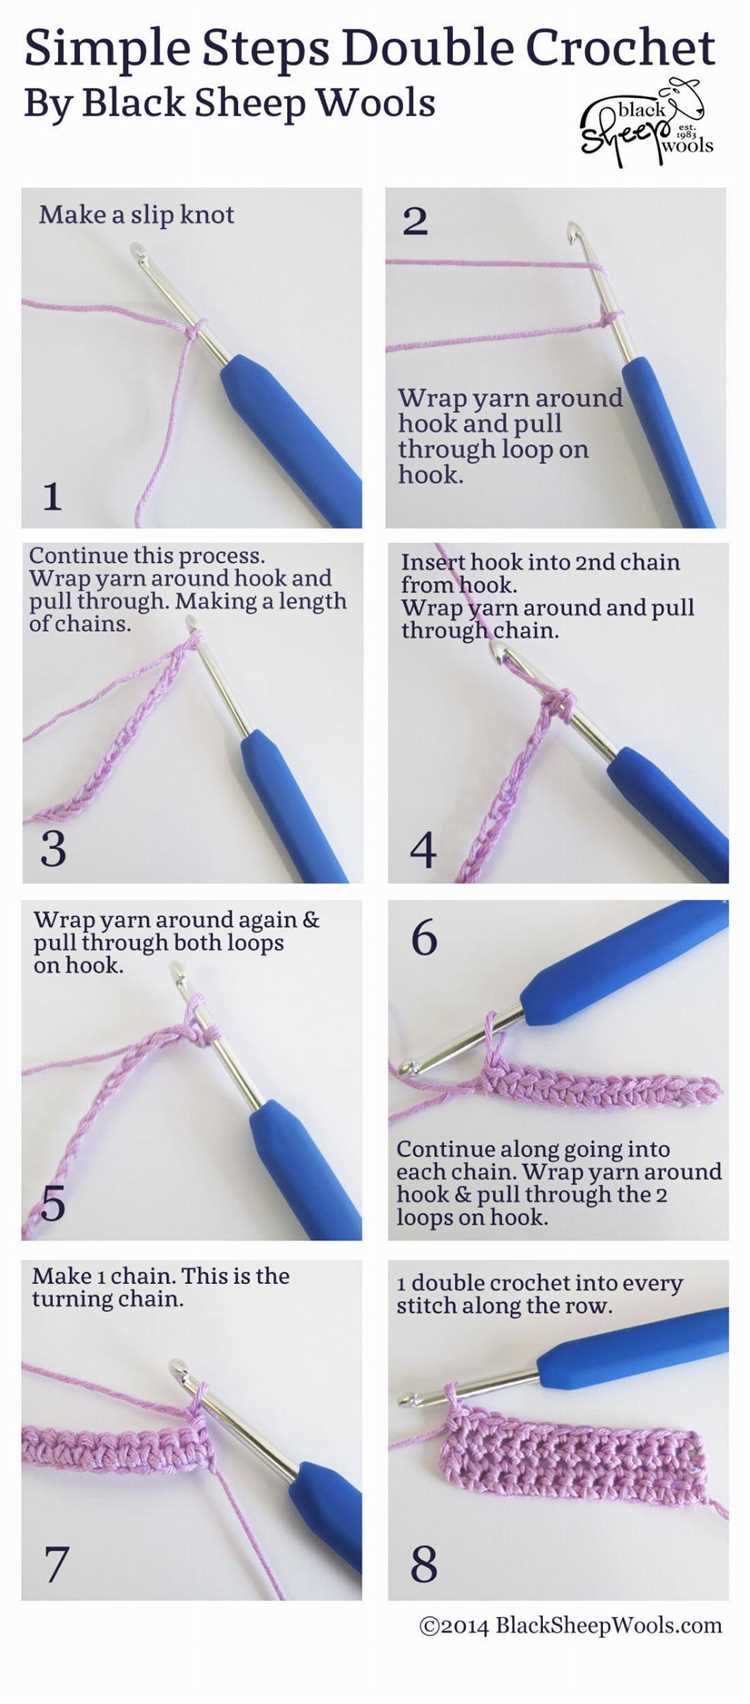 Step-by-Step Guide: Knitting a Second Row